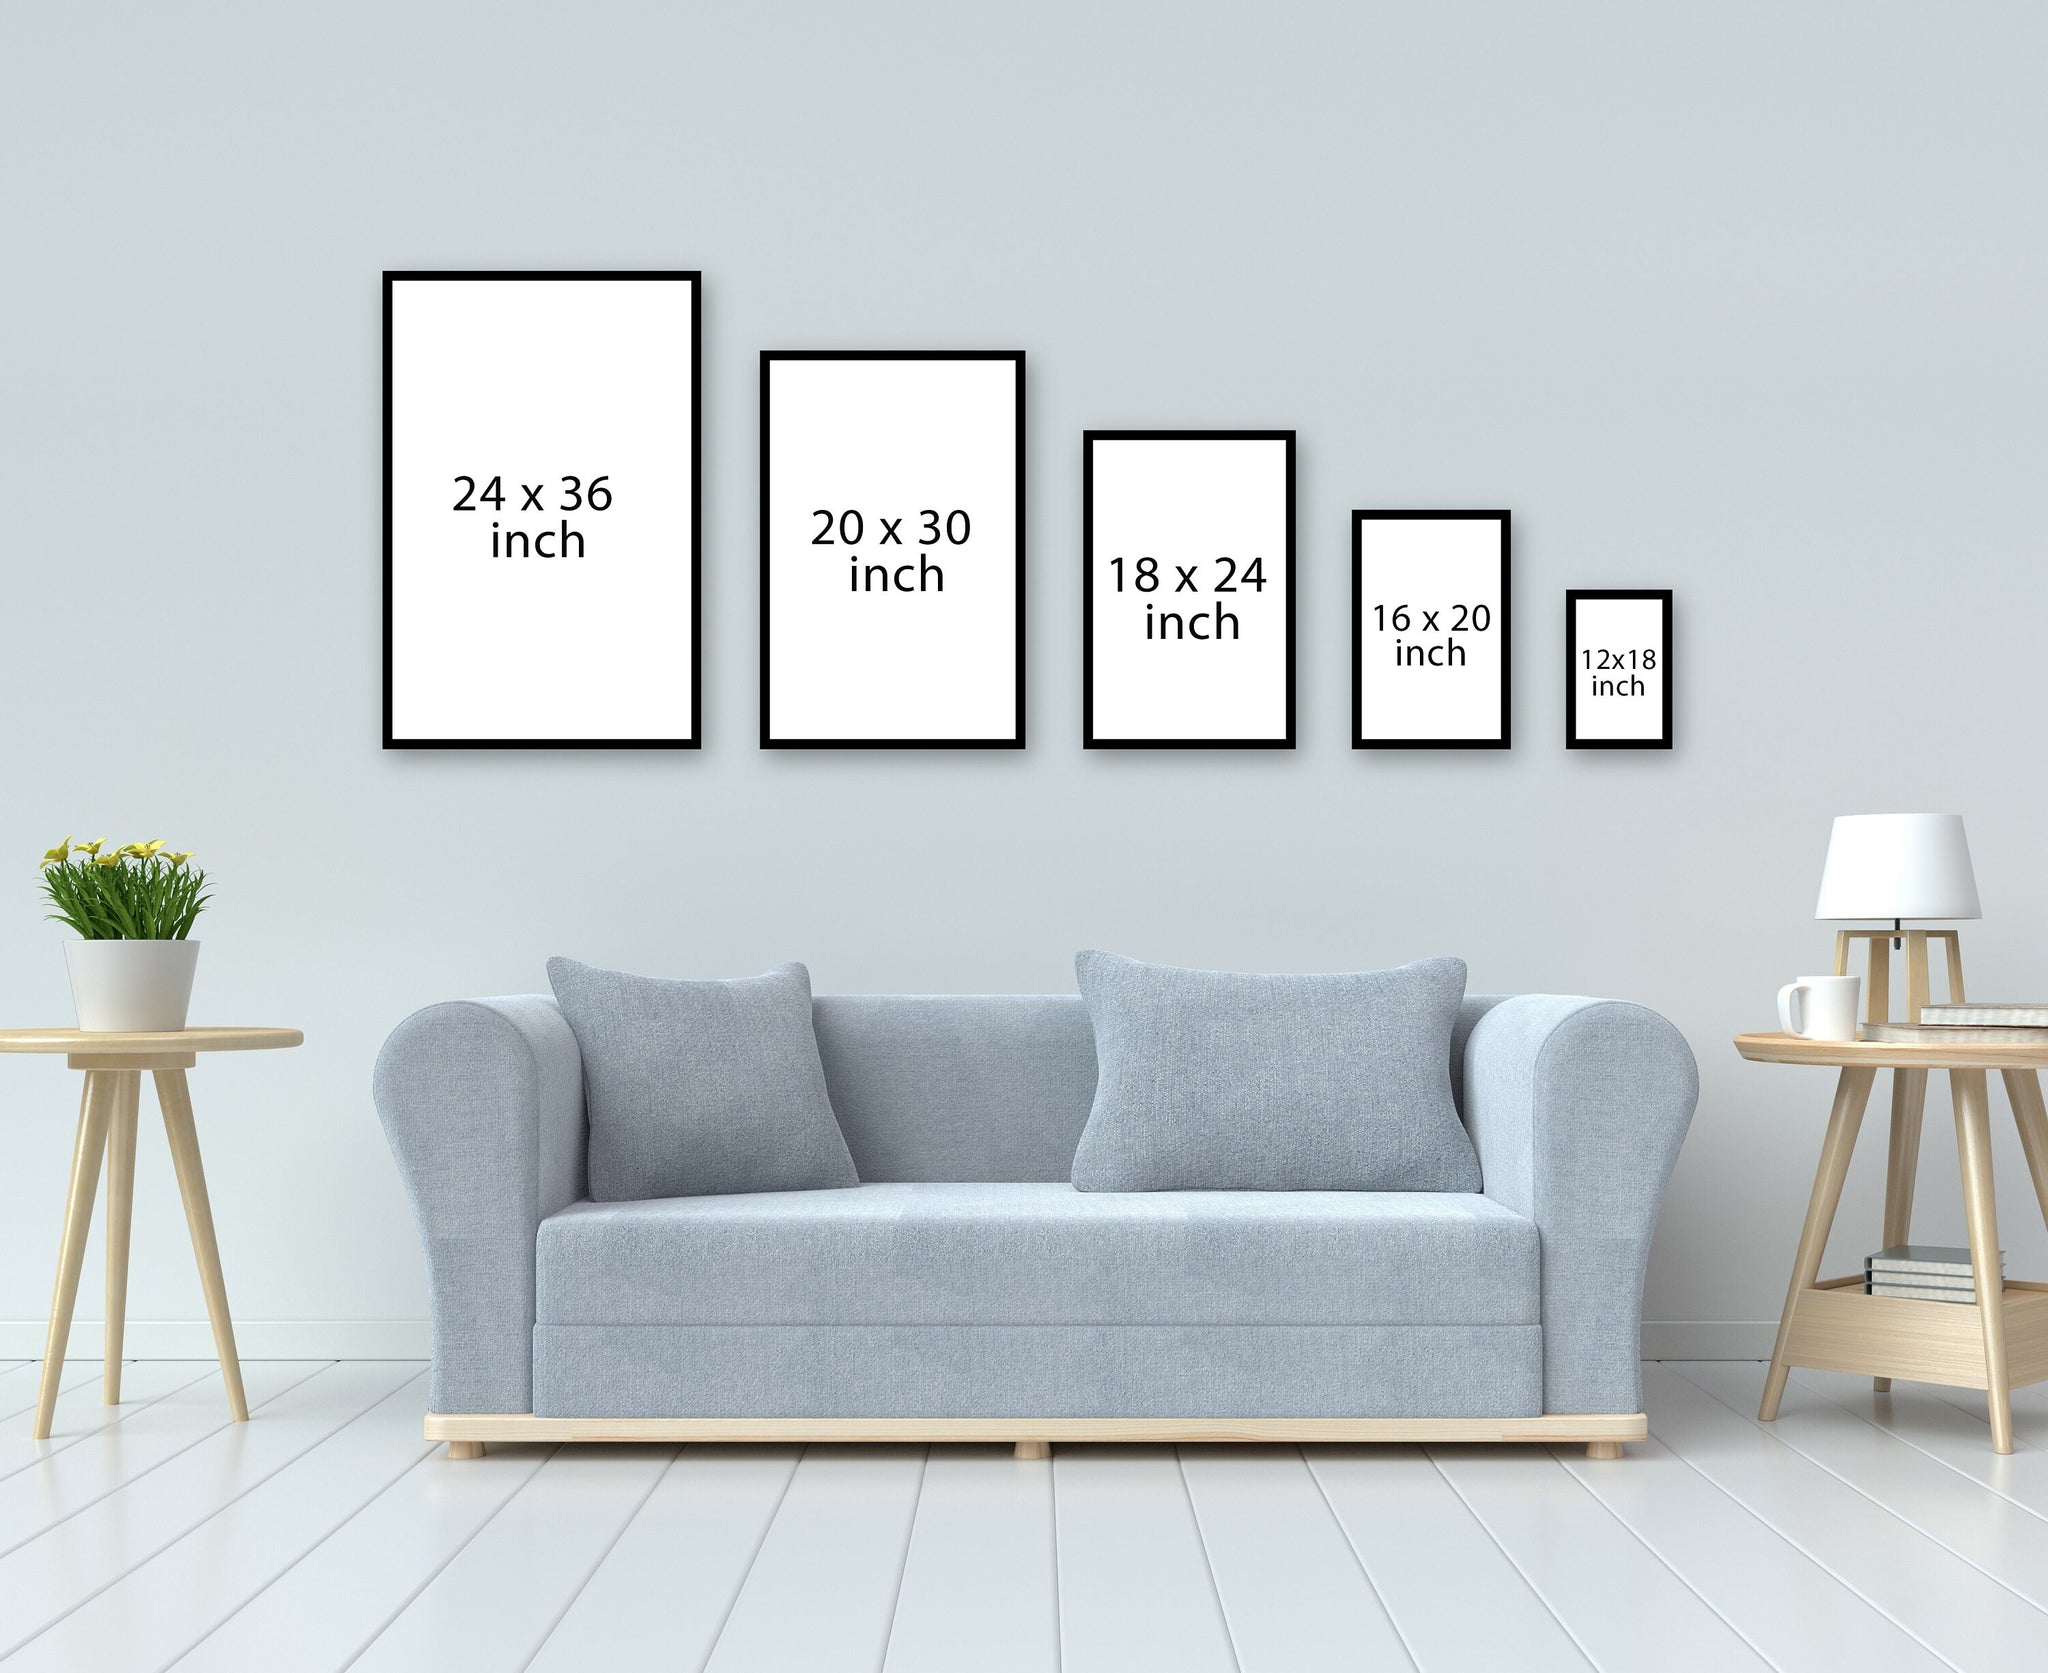 Home Quotes, Quotes Poster print, Home wall decoration, Living room quotes, Family room wall arts, Entrepreneur Modern posters, Gift for Mom